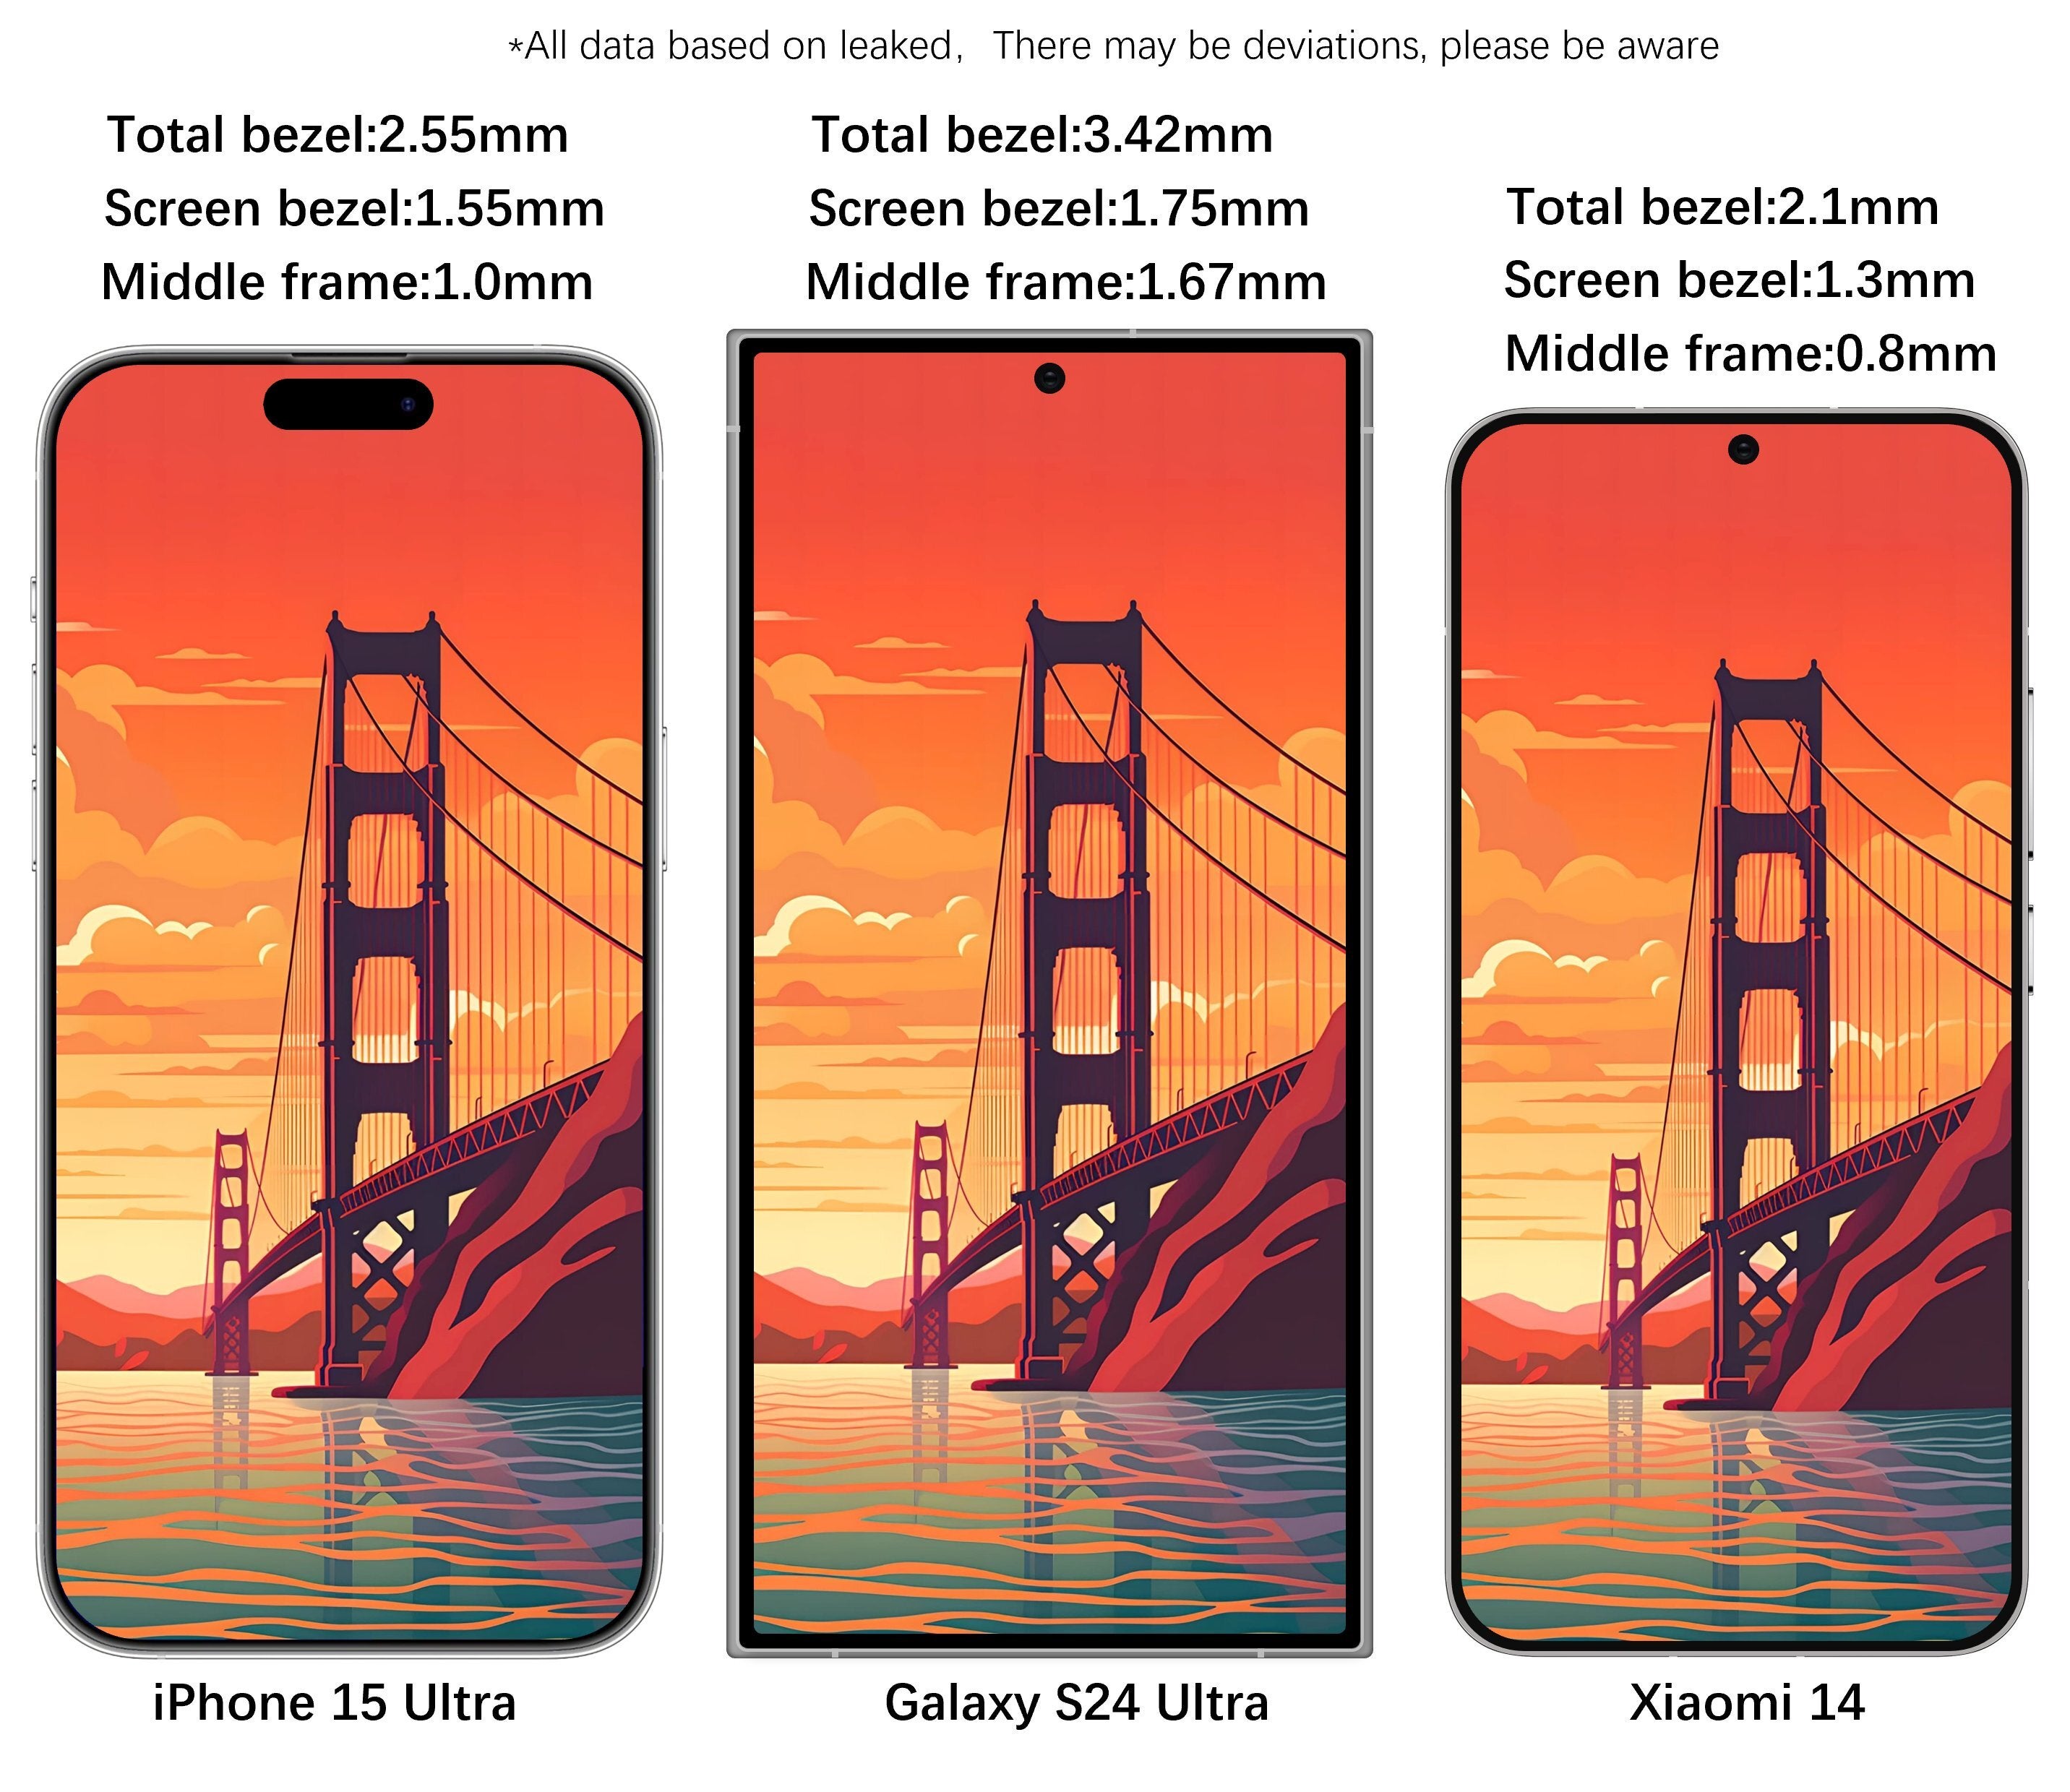 Renders illustrate potential differences between Galaxy S24 Ultra and iPhone 15 Ultra